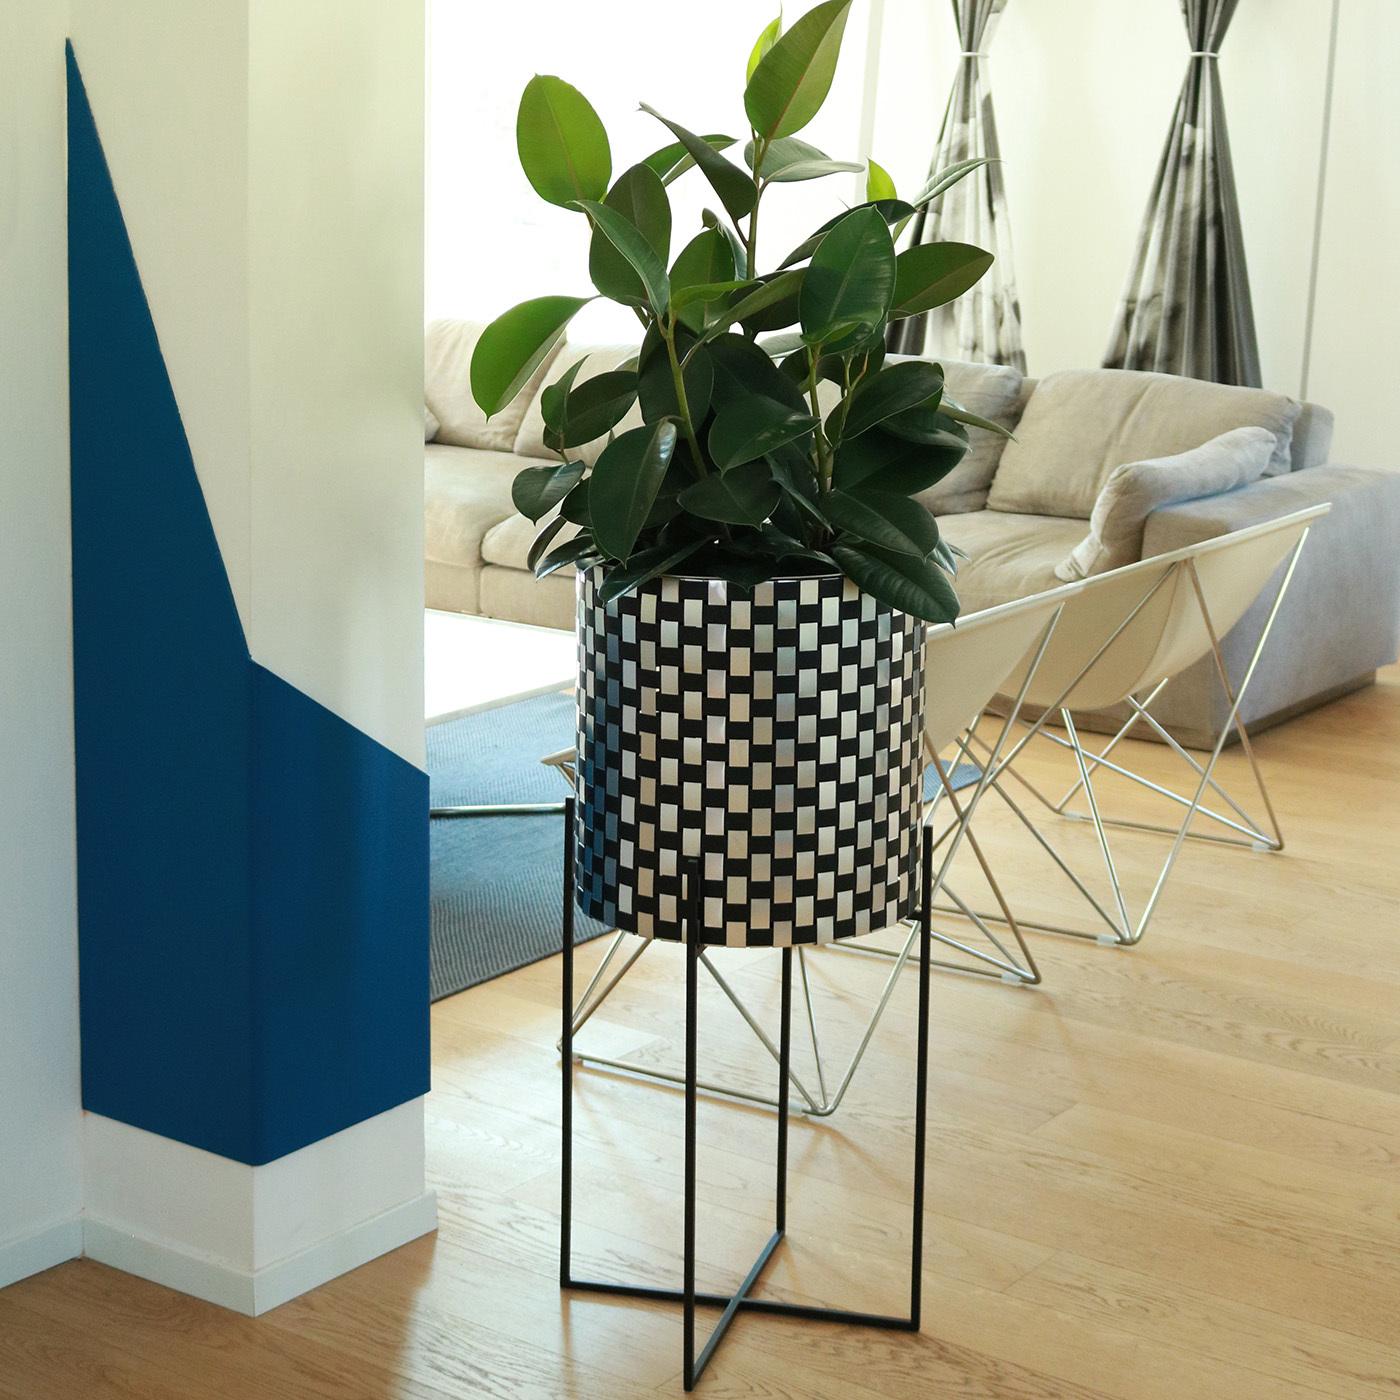 This sublime plant holder was designed to stand out in any decor. The black-painted iron structure (H 60cm) supports a cylindrical steel pot fashioned using a unique material patented by Inthegarden Design Studio featuring woven sheets of black- and